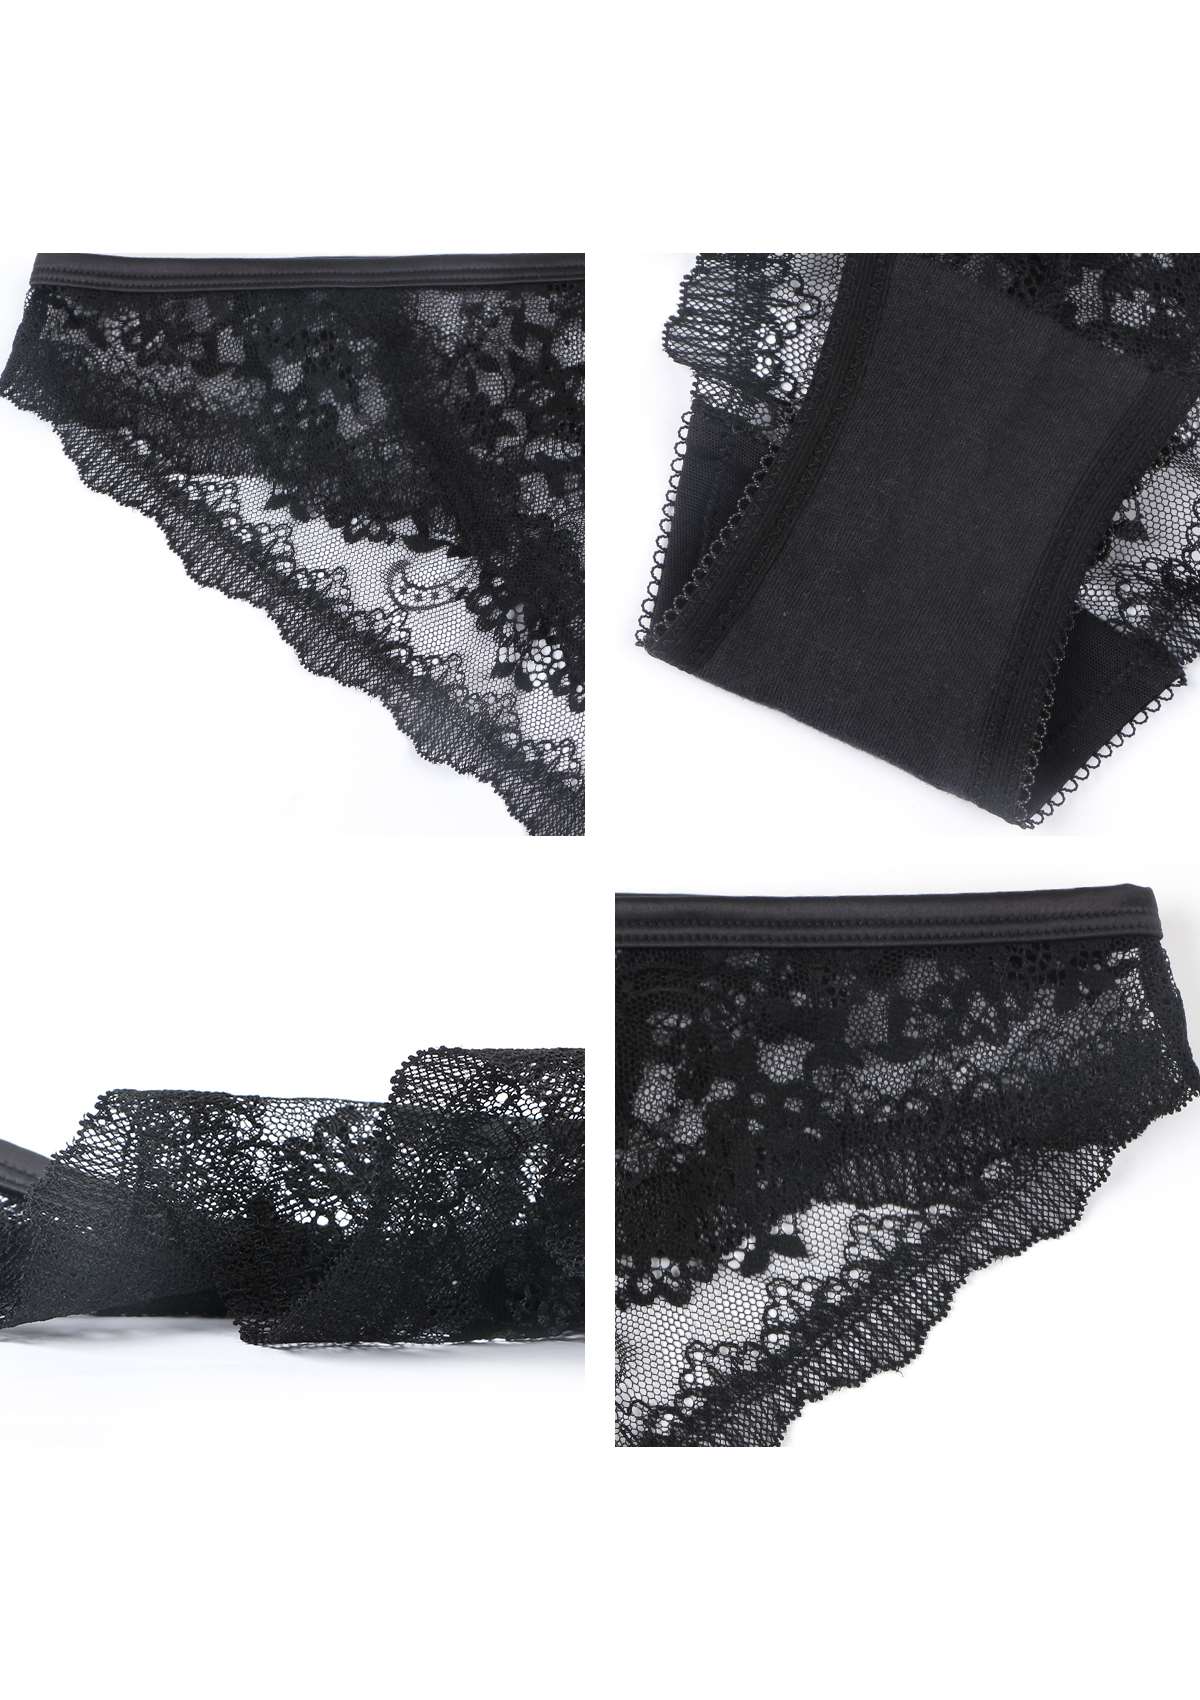 HSIA Floral Lace Bridal Cheeky Underwear: Delicate, Airy, And Comfy - Black / XL